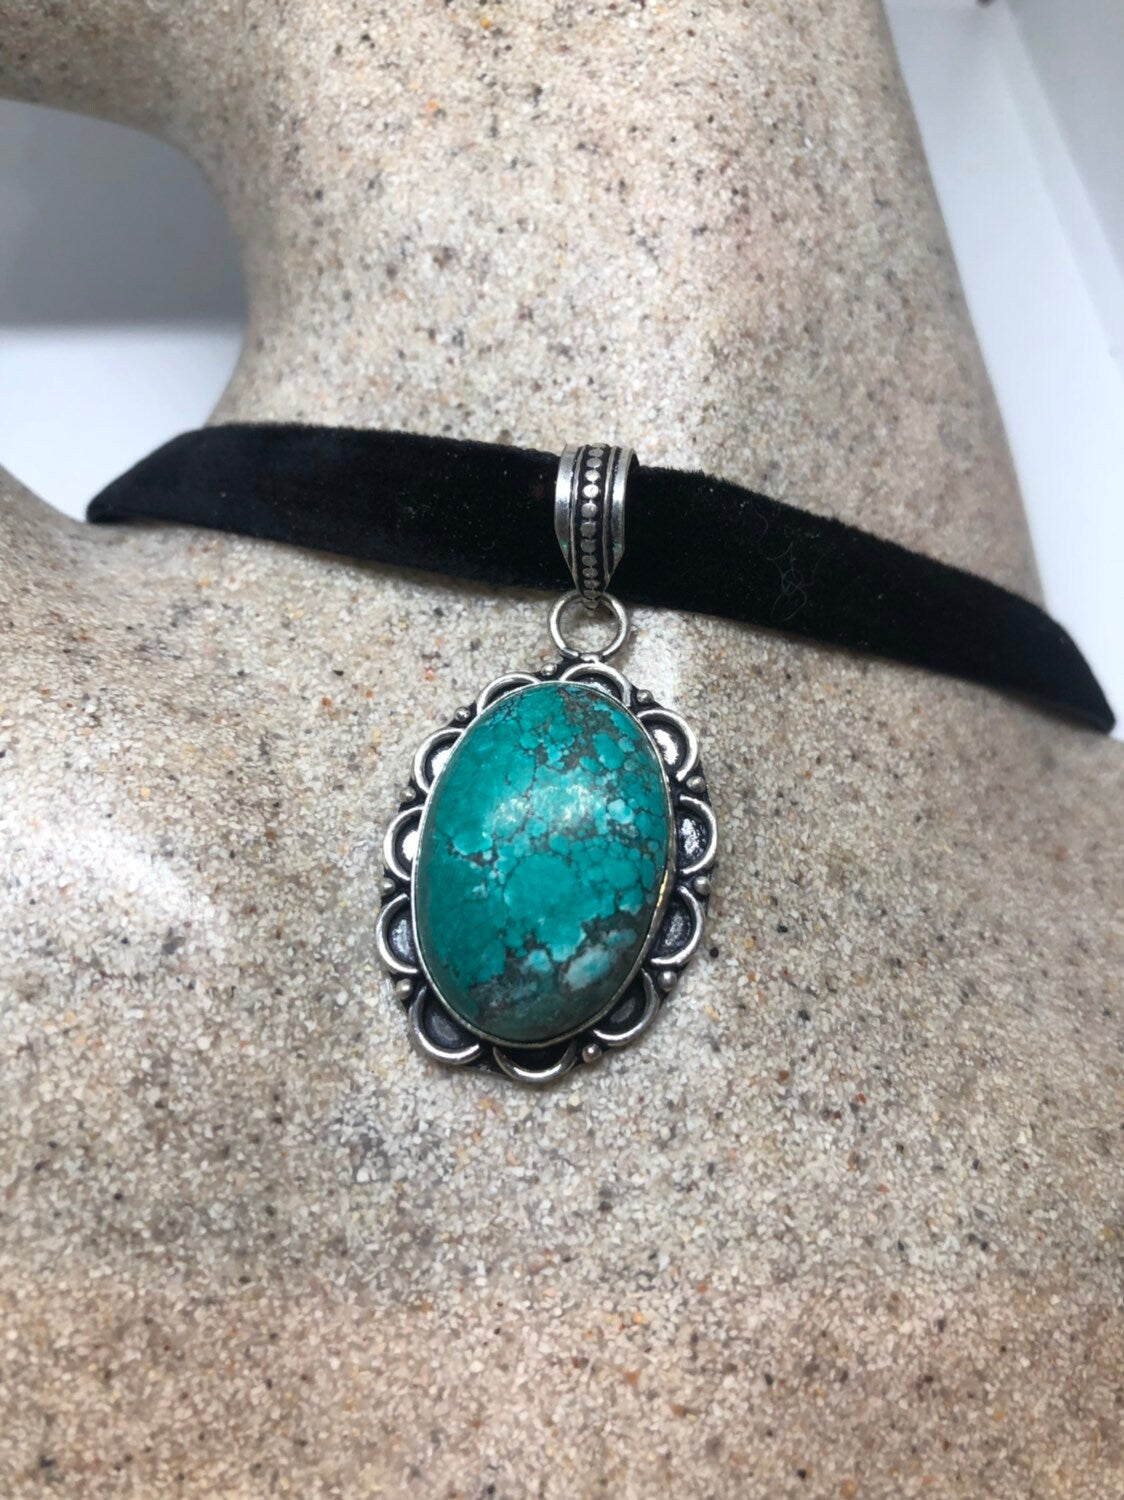 Blue Handmade Gothic Styled Silver Finished Genuine Tibetan Turquoise Choker Necklace